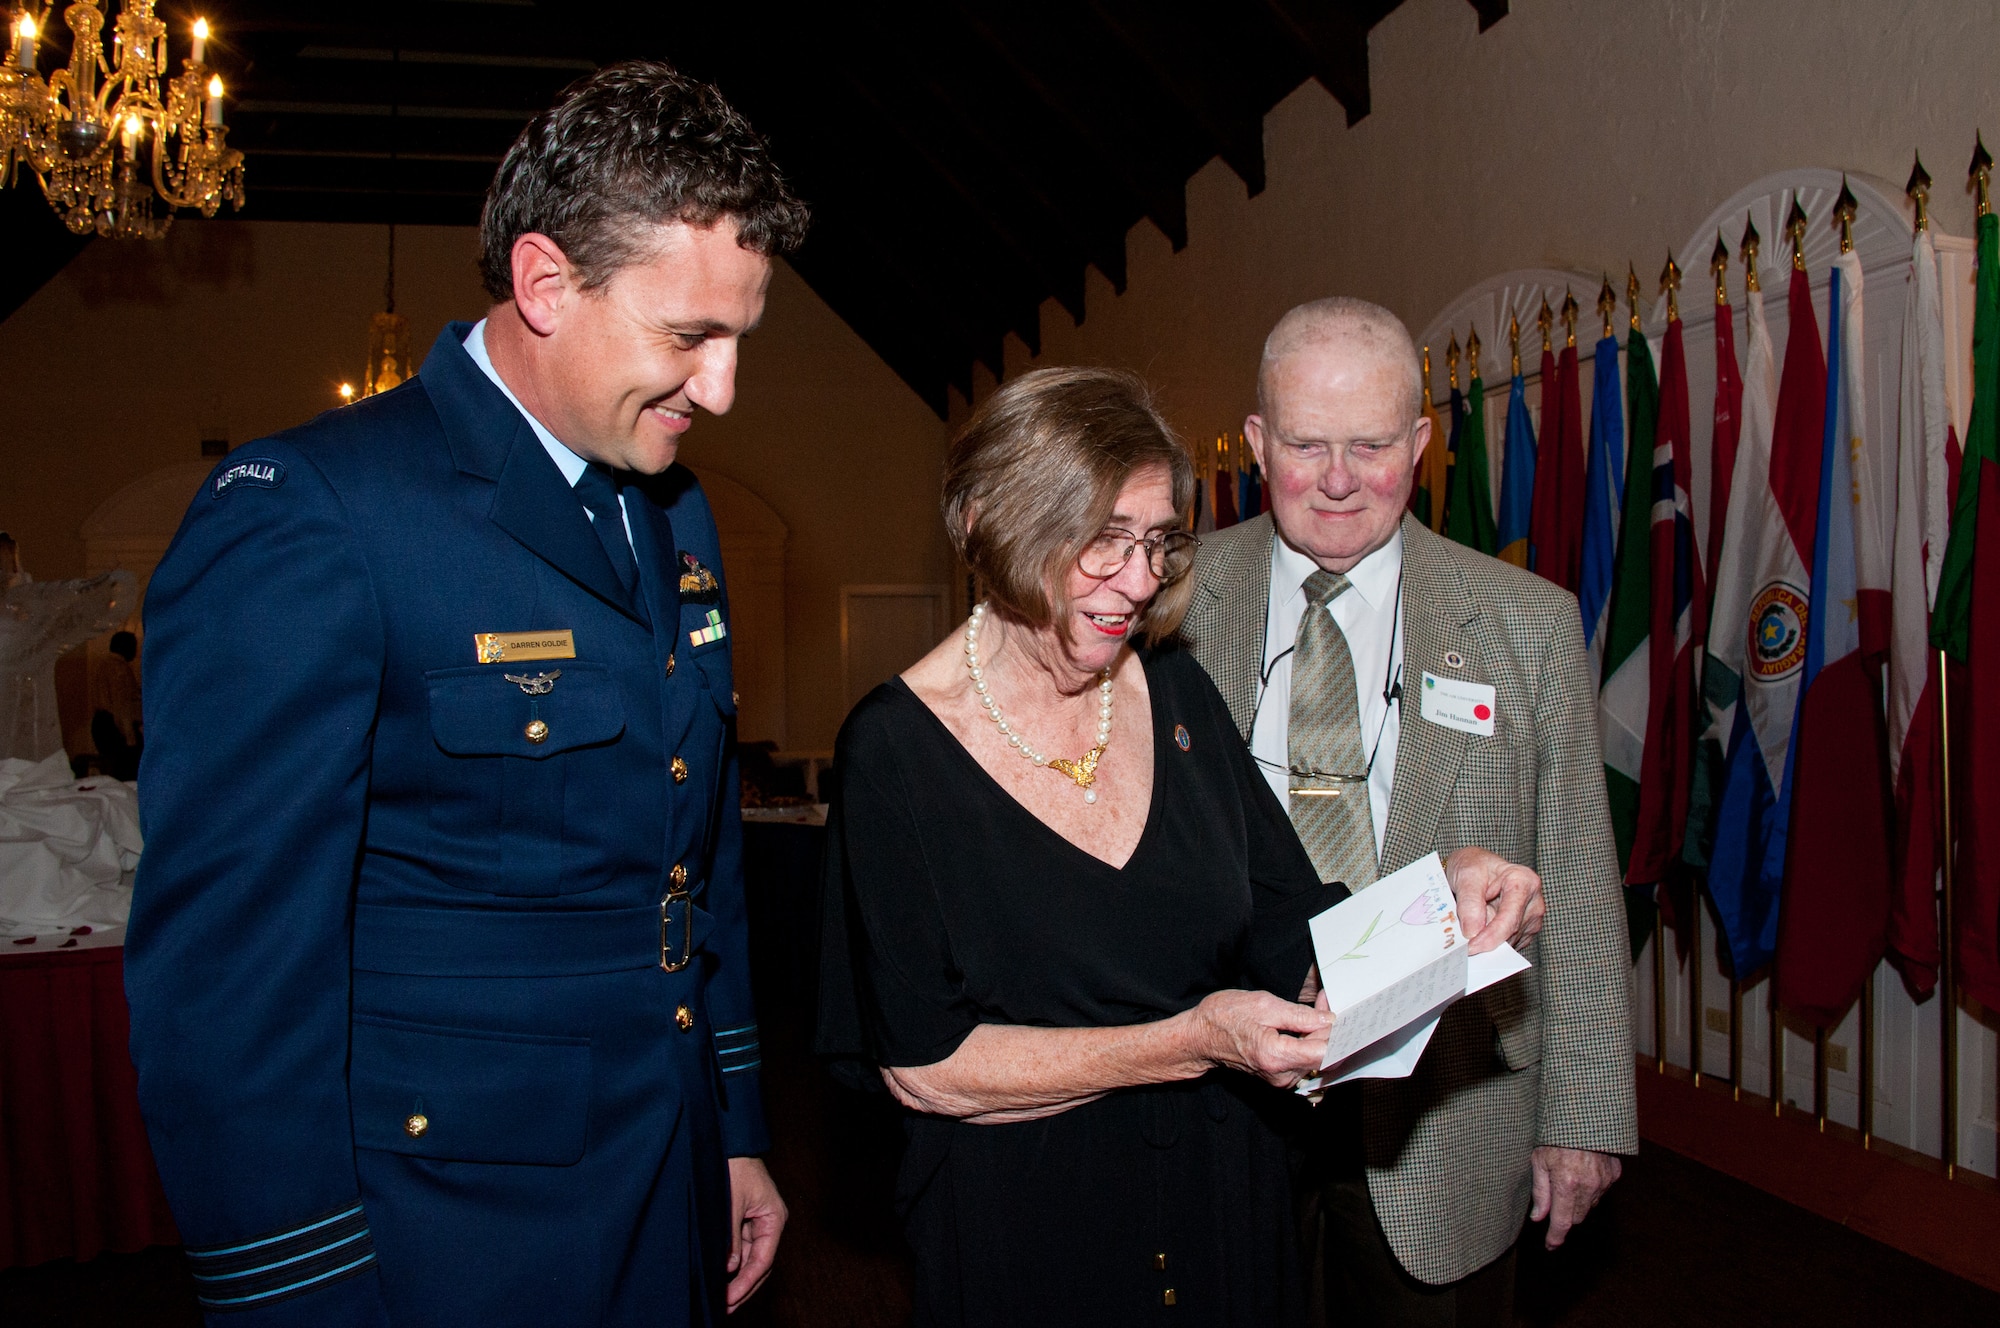 Wing Commander Darren Goldie of the Royal Australian air force, from left, watches as 40-class award recipients Dottye and Jim Hannan read a card of thanks crafted by his children. Volunteers who sponsor international officers during their studies at the Air University were honored with an awards ceremony Tuesday. (Air Force photo/Melanie Rodgers Cox)